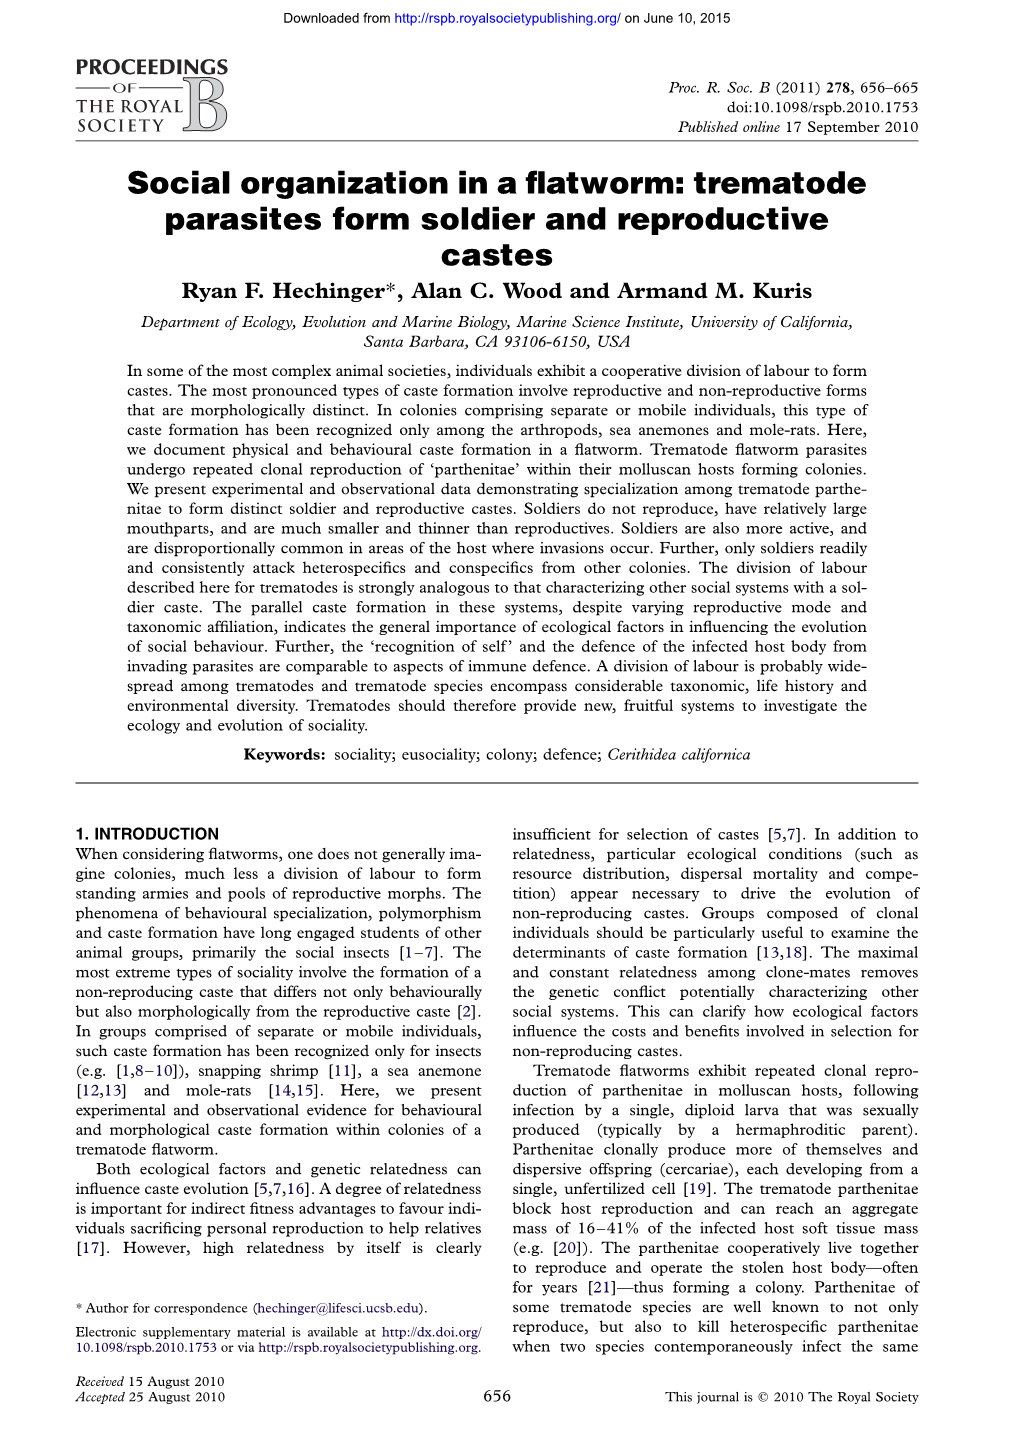 Trematode Parasites Form Soldier and Reproductive Castes Ryan F